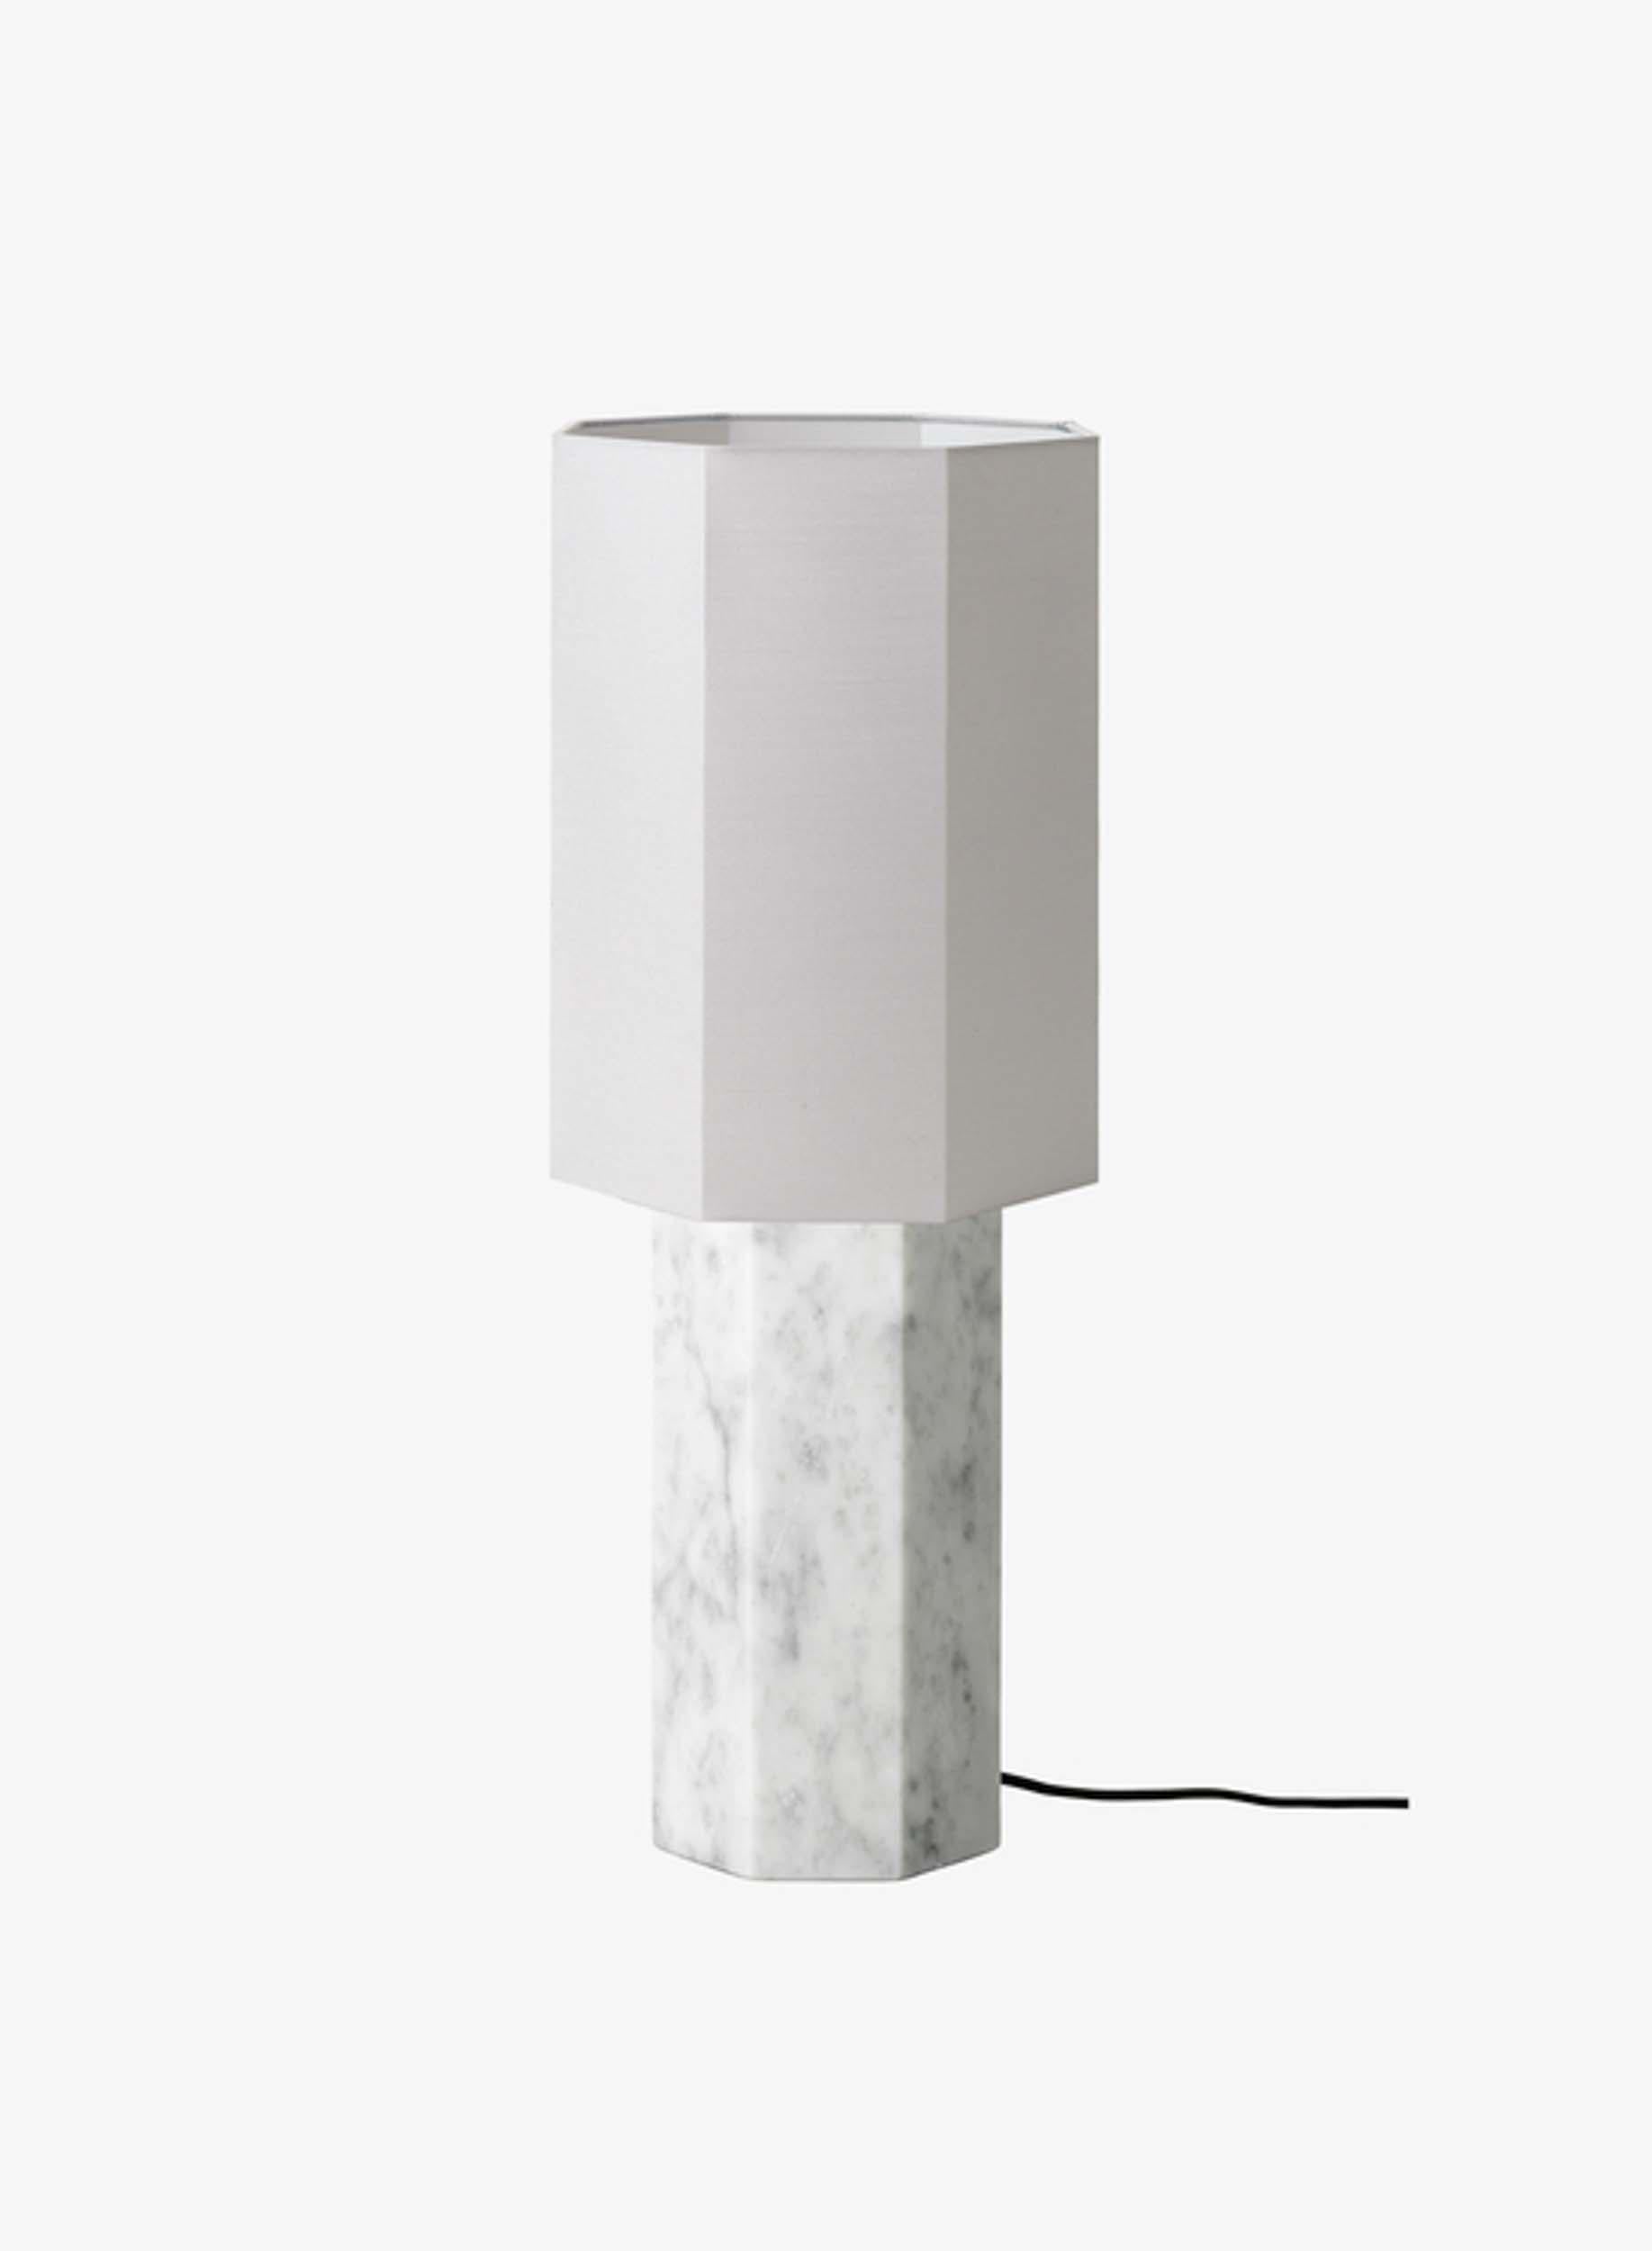 Table Lamp 'The Eight over Eight' by Louise Roe 

Designed in Denmark and manufactured in Italy.

Model shown in the picture: 
Base: White marble
Lampshade: Light grey 

Dimensions : 
Height: 60 cm
Diameter: 21.5 cm

Louise Roe is a Copenhagen based